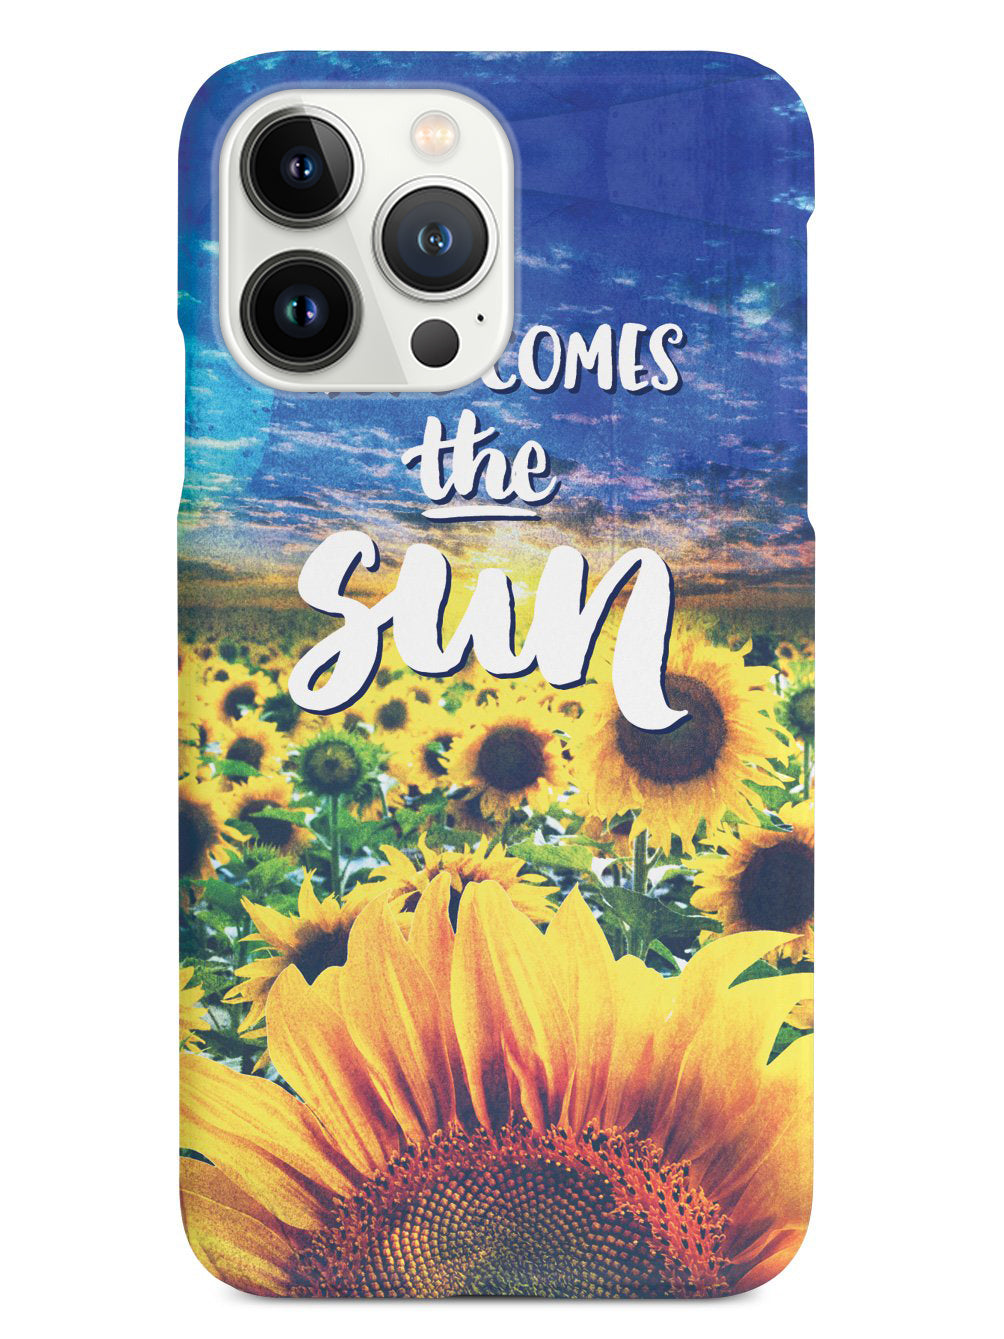 Here Comes the Sun - Sunflower Case